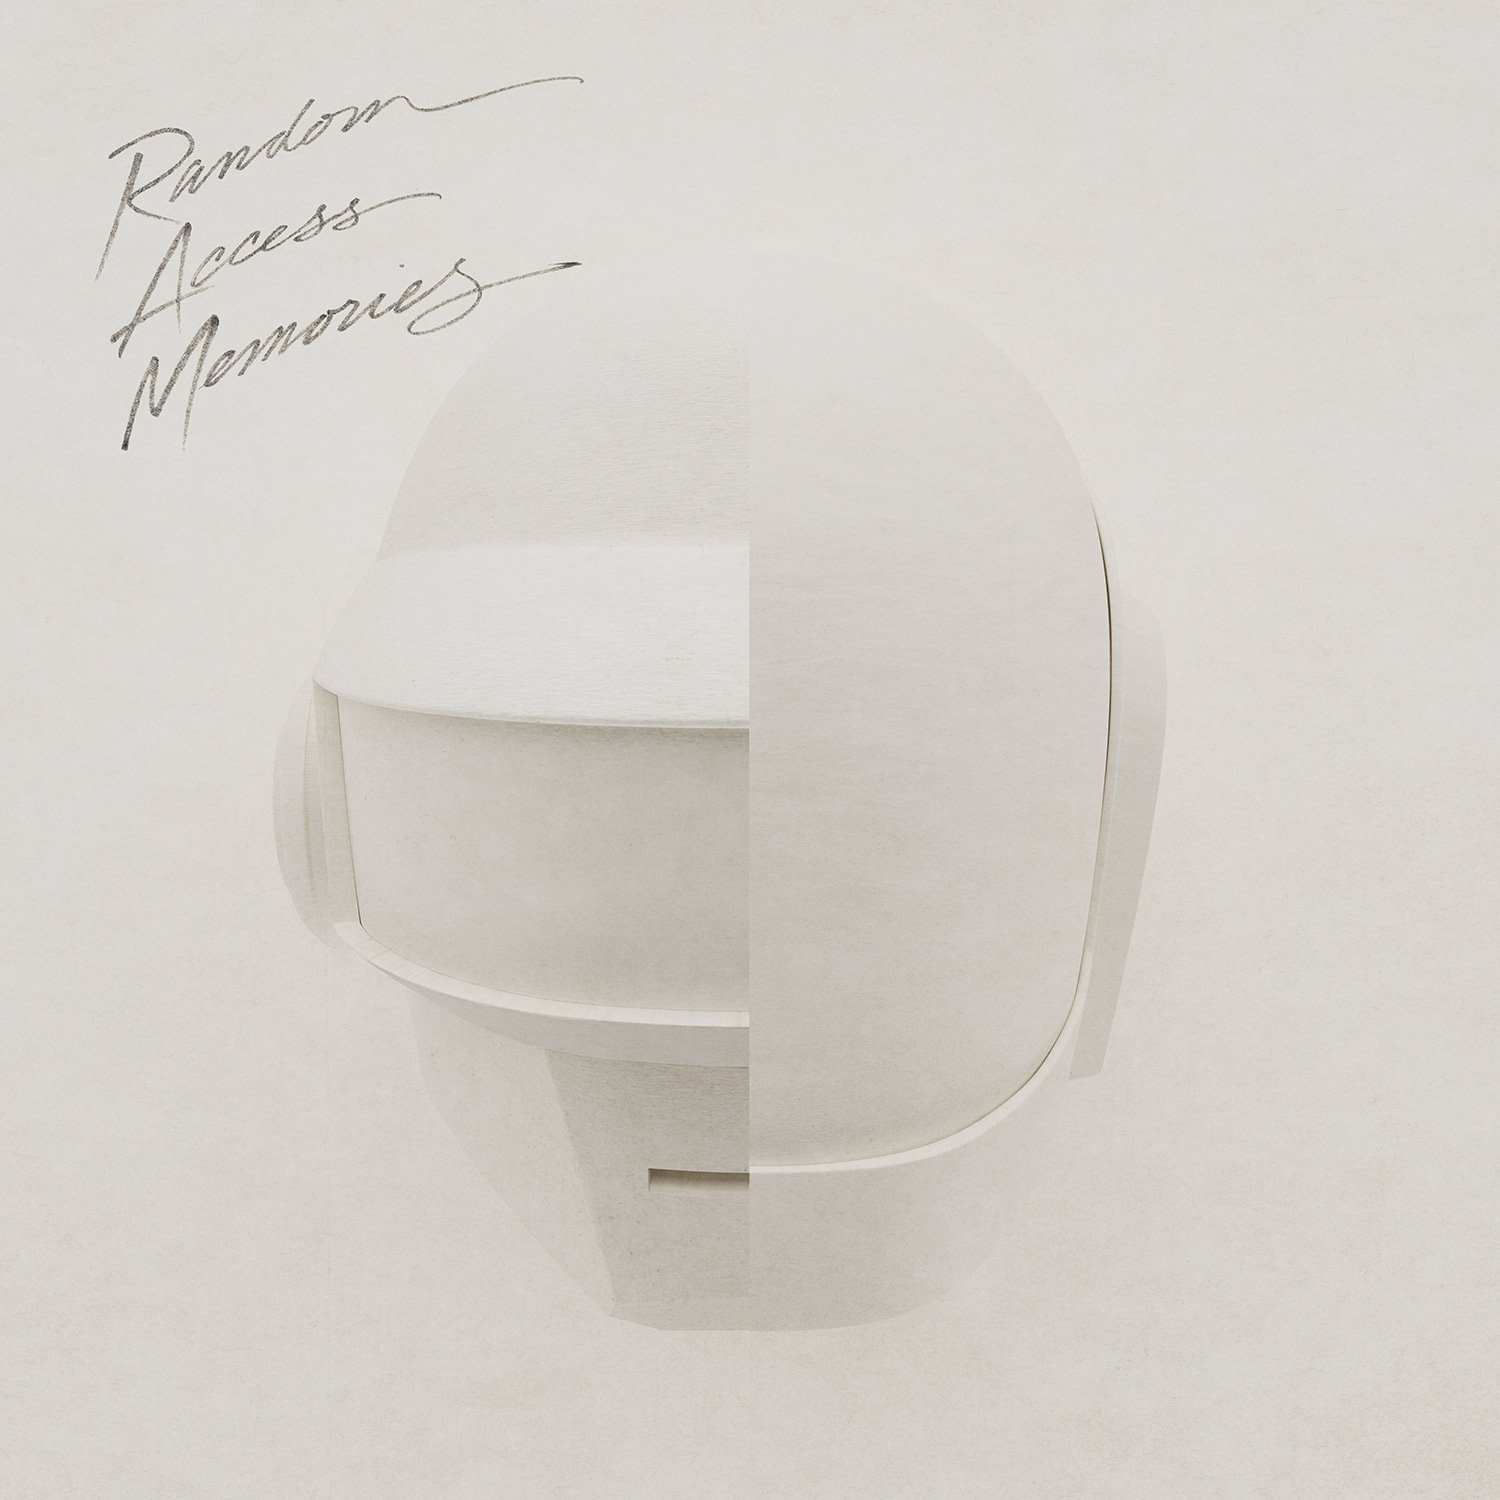 Daft Punk Random Access Memories (Drumless Edition) Available Now